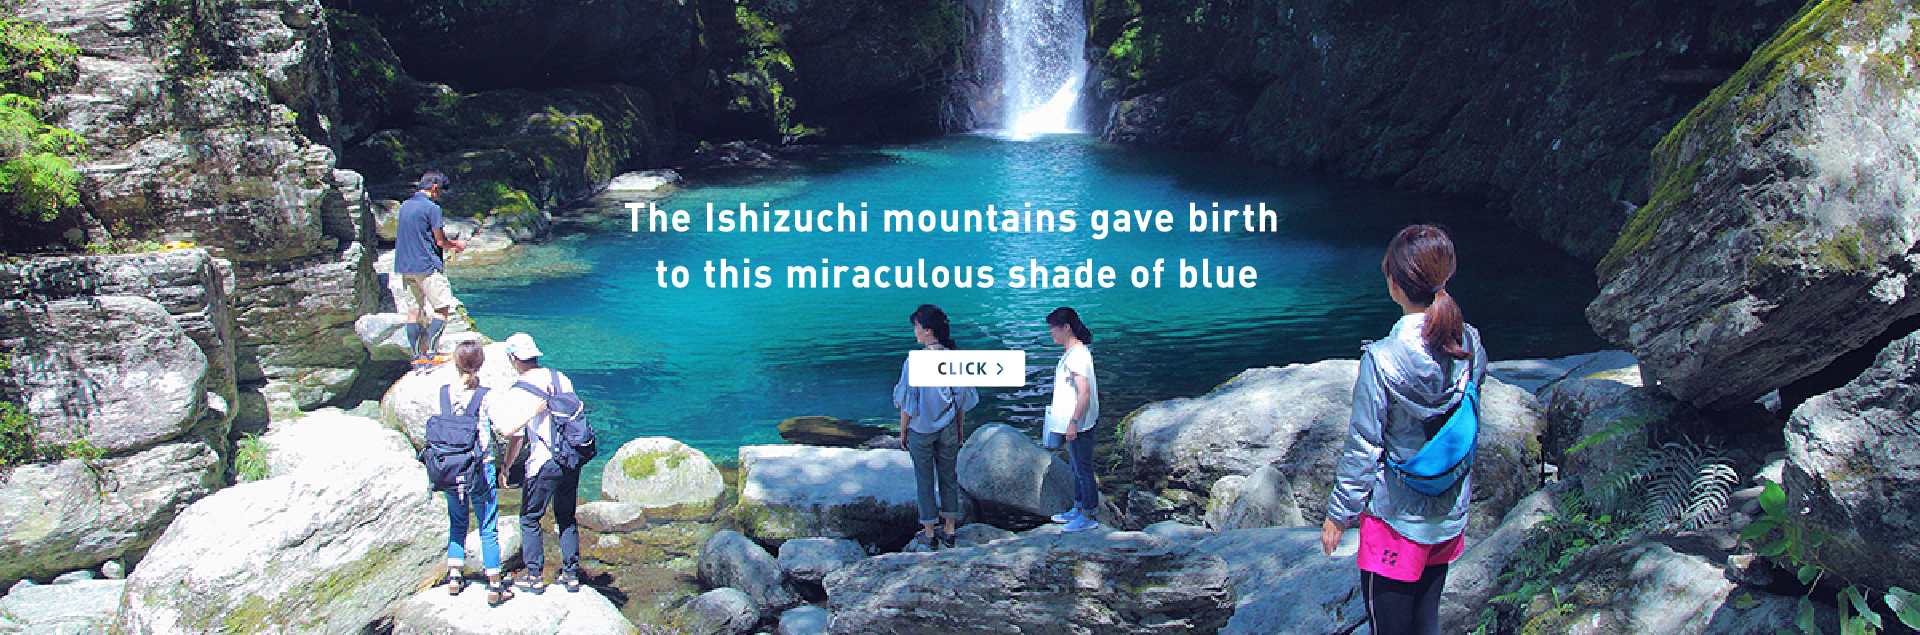 The Ishizuchi mountains gave this miraculous shade of blue